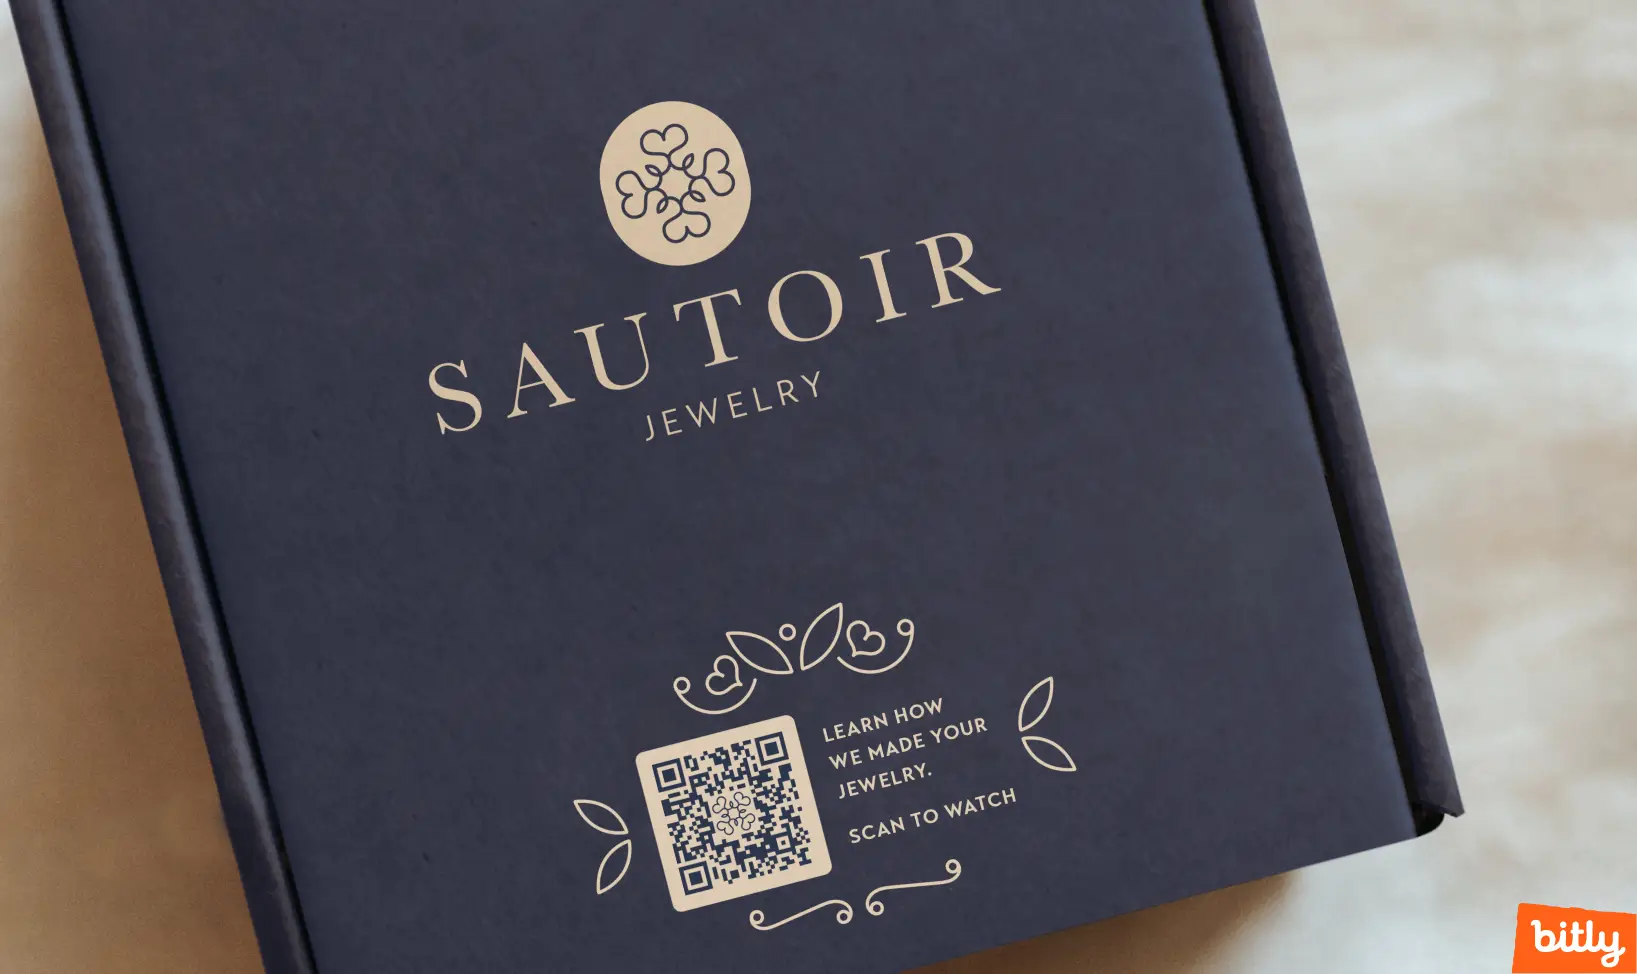 Beige logo, font, and a QR Code against dark blue jewelry packaging.